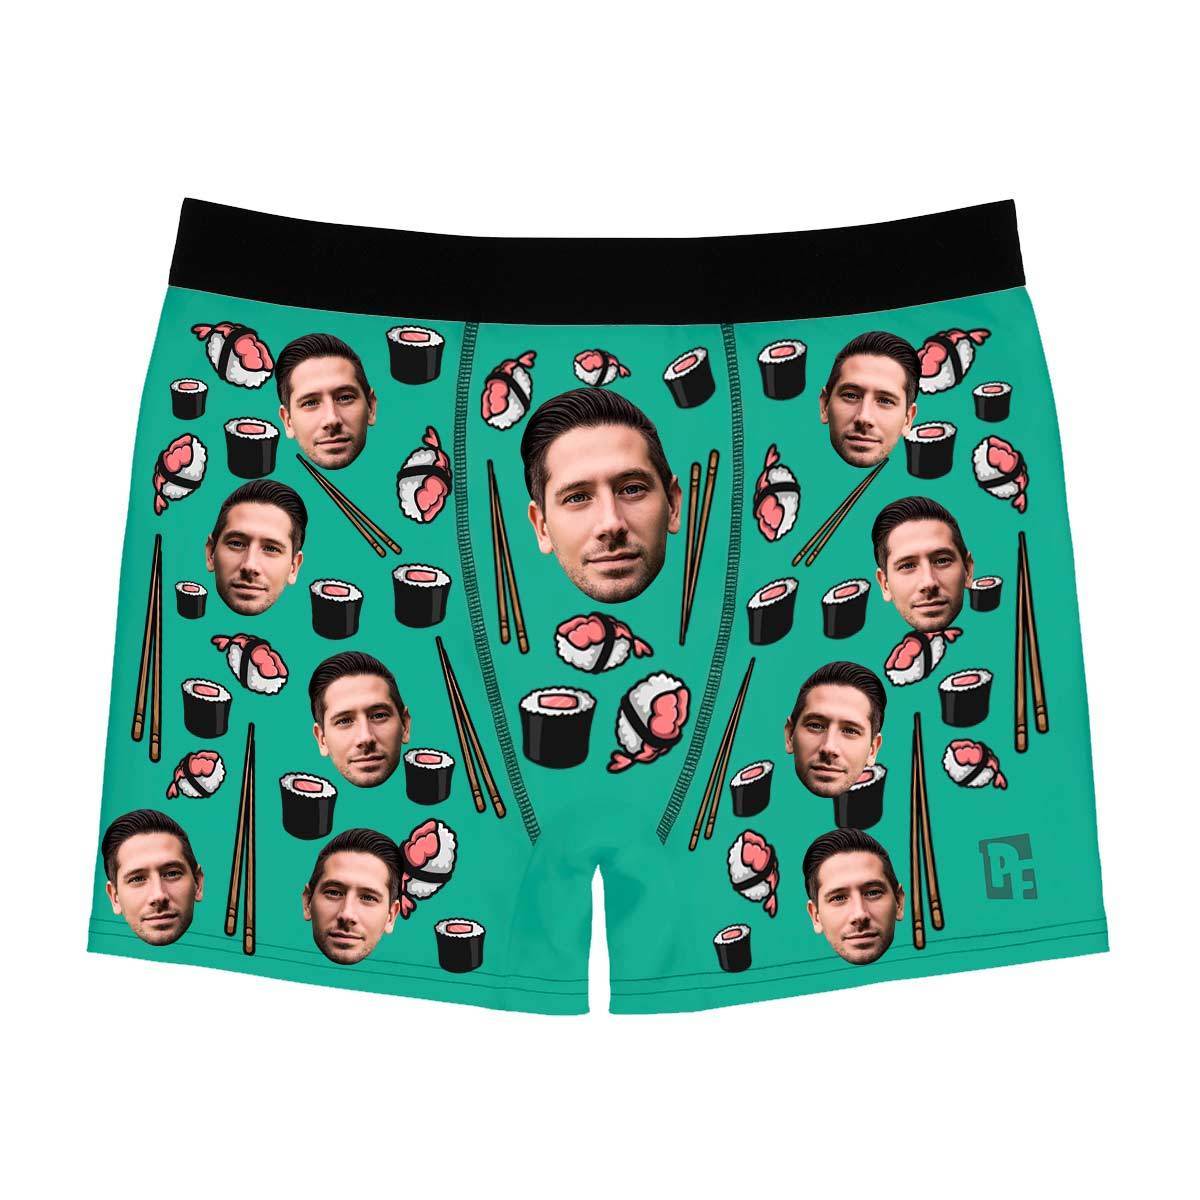 Mint Sushi men's boxer briefs personalized with photo printed on them